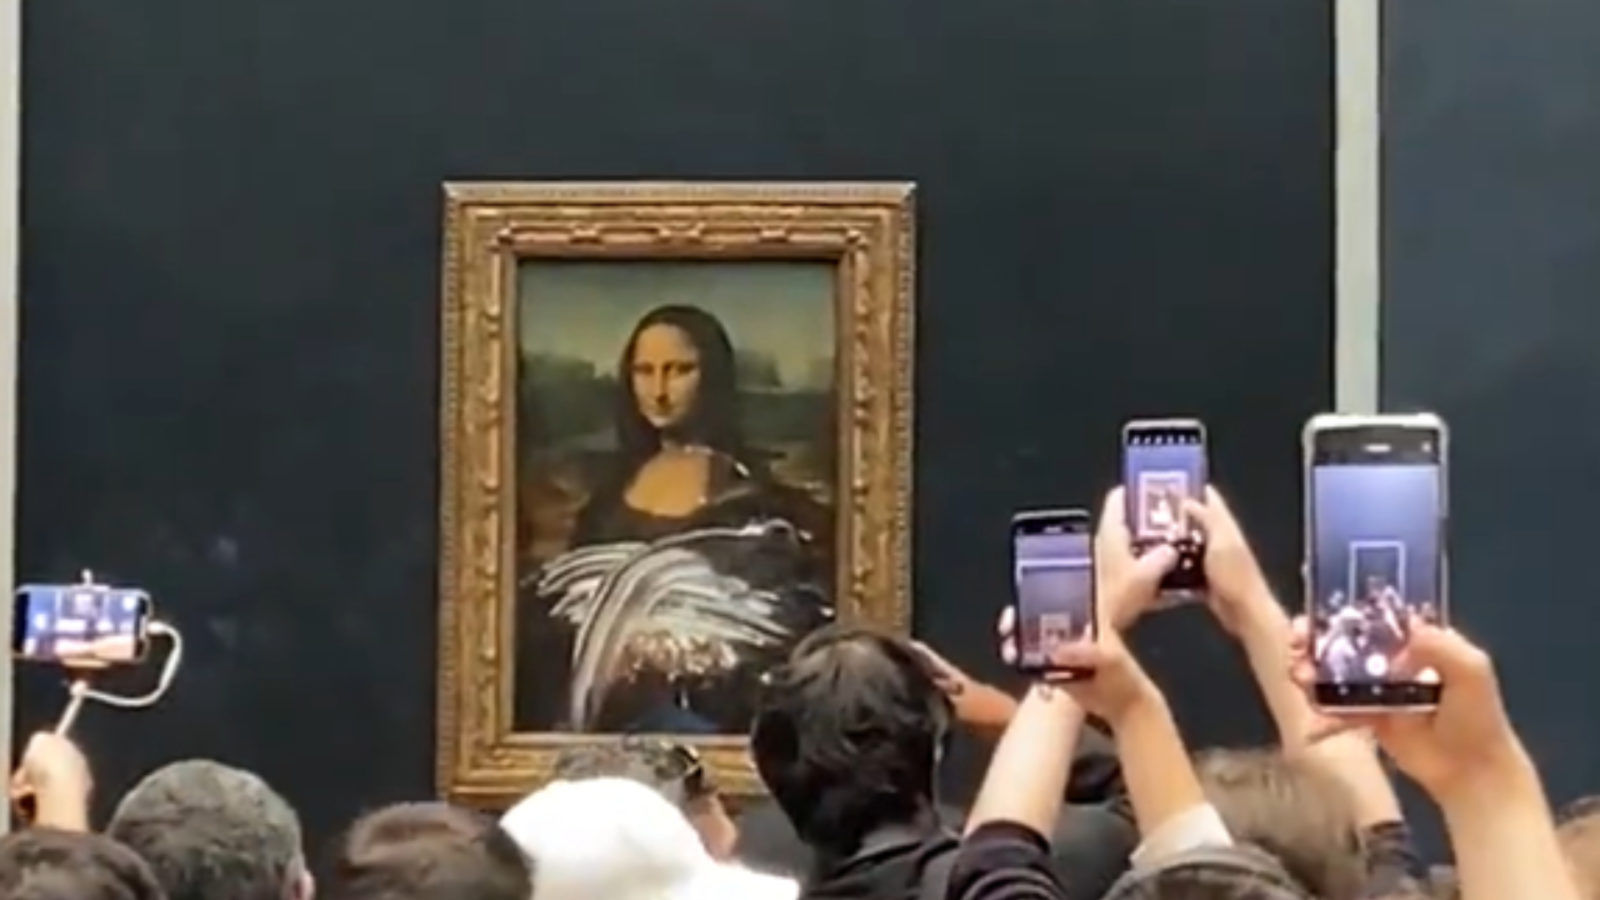 World’s most famous artworks that have been targeted by vandals